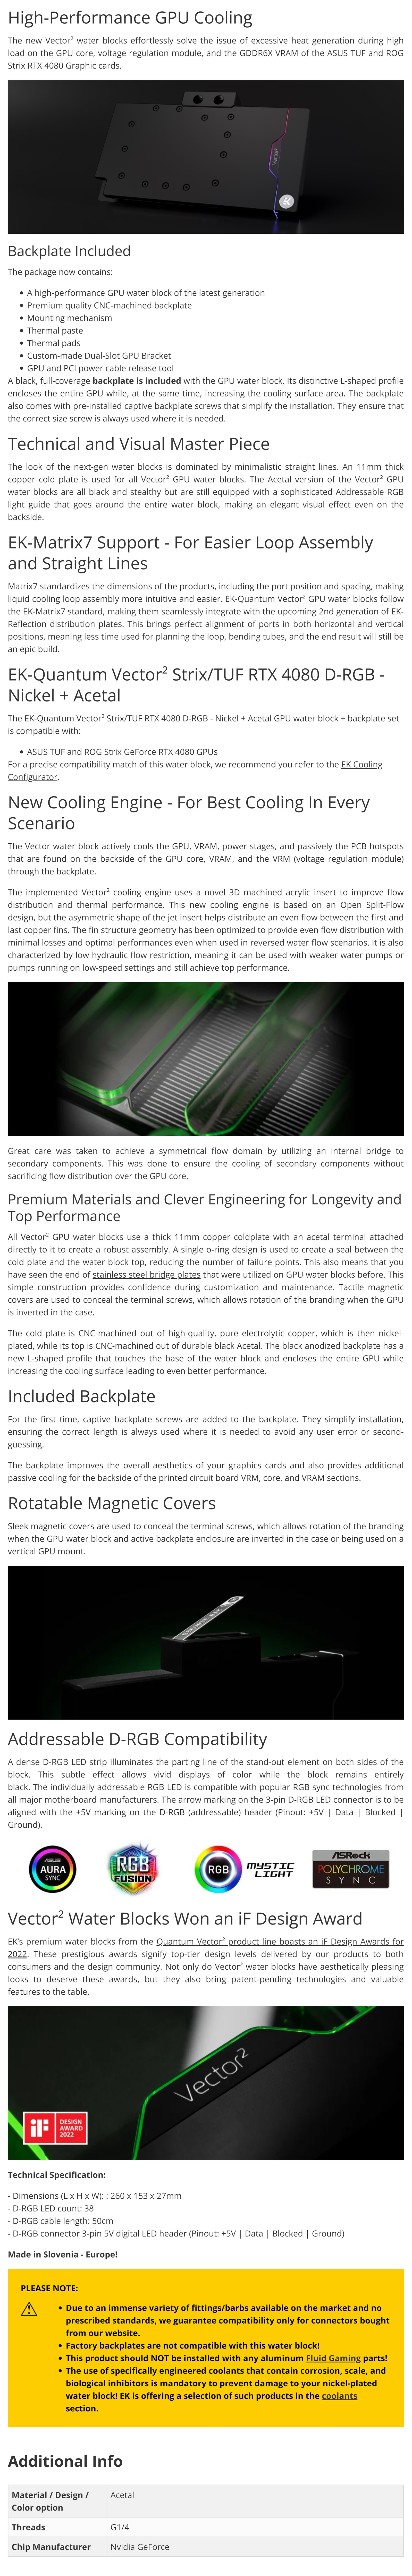 A large marketing image providing additional information about the product EK Quantum Vector2 Strix/TUF RTX 4080 D-RGB GPU Waterblock - Nickel + Acetal - Additional alt info not provided